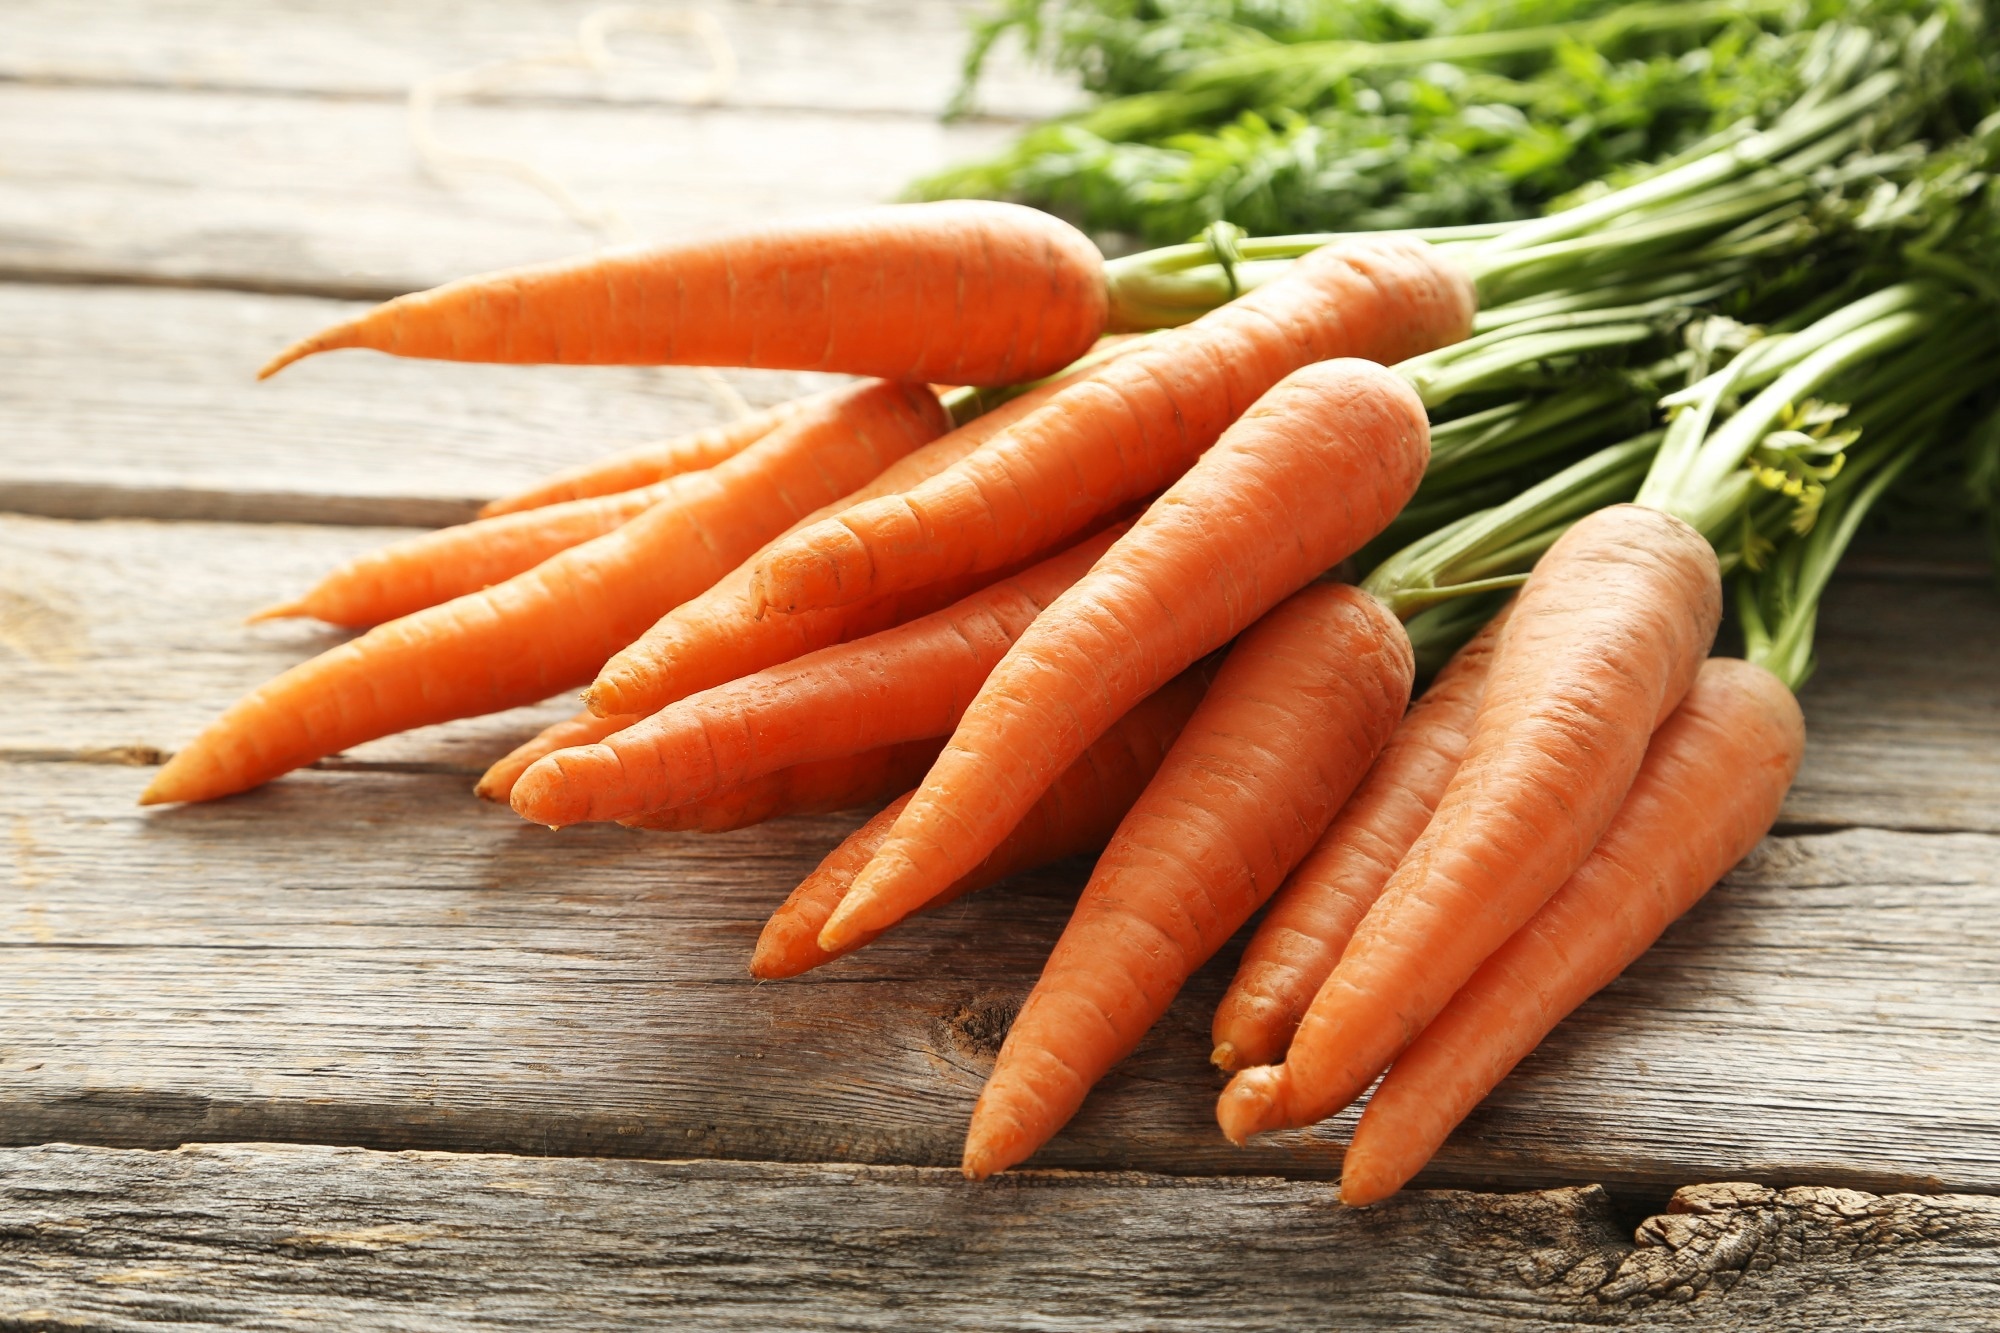 Study: Carrot RG-I Reduces Interindividual Differences between 24 Adults through Consistent Effects on Gut Microbiota Composition and Function Ex Vivo. Image Credit: 5secondStudio/Shutterstock.com